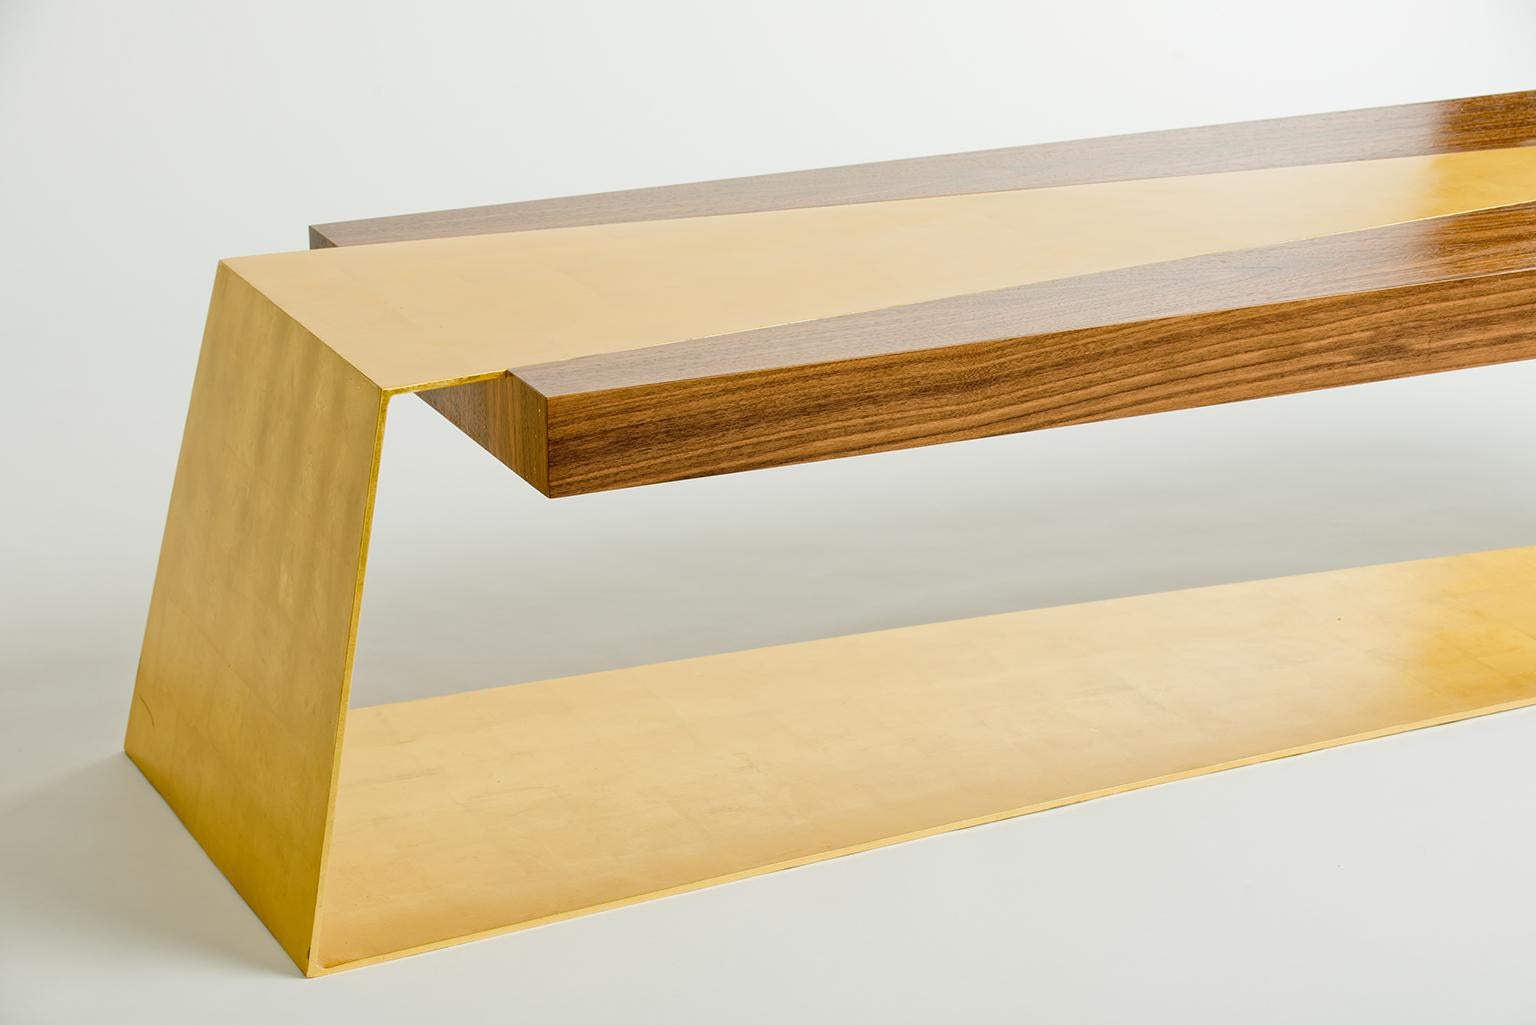 American Bowery Bench or Coffee Table, Walnut and Gold Leaf, by Dean and Dahl